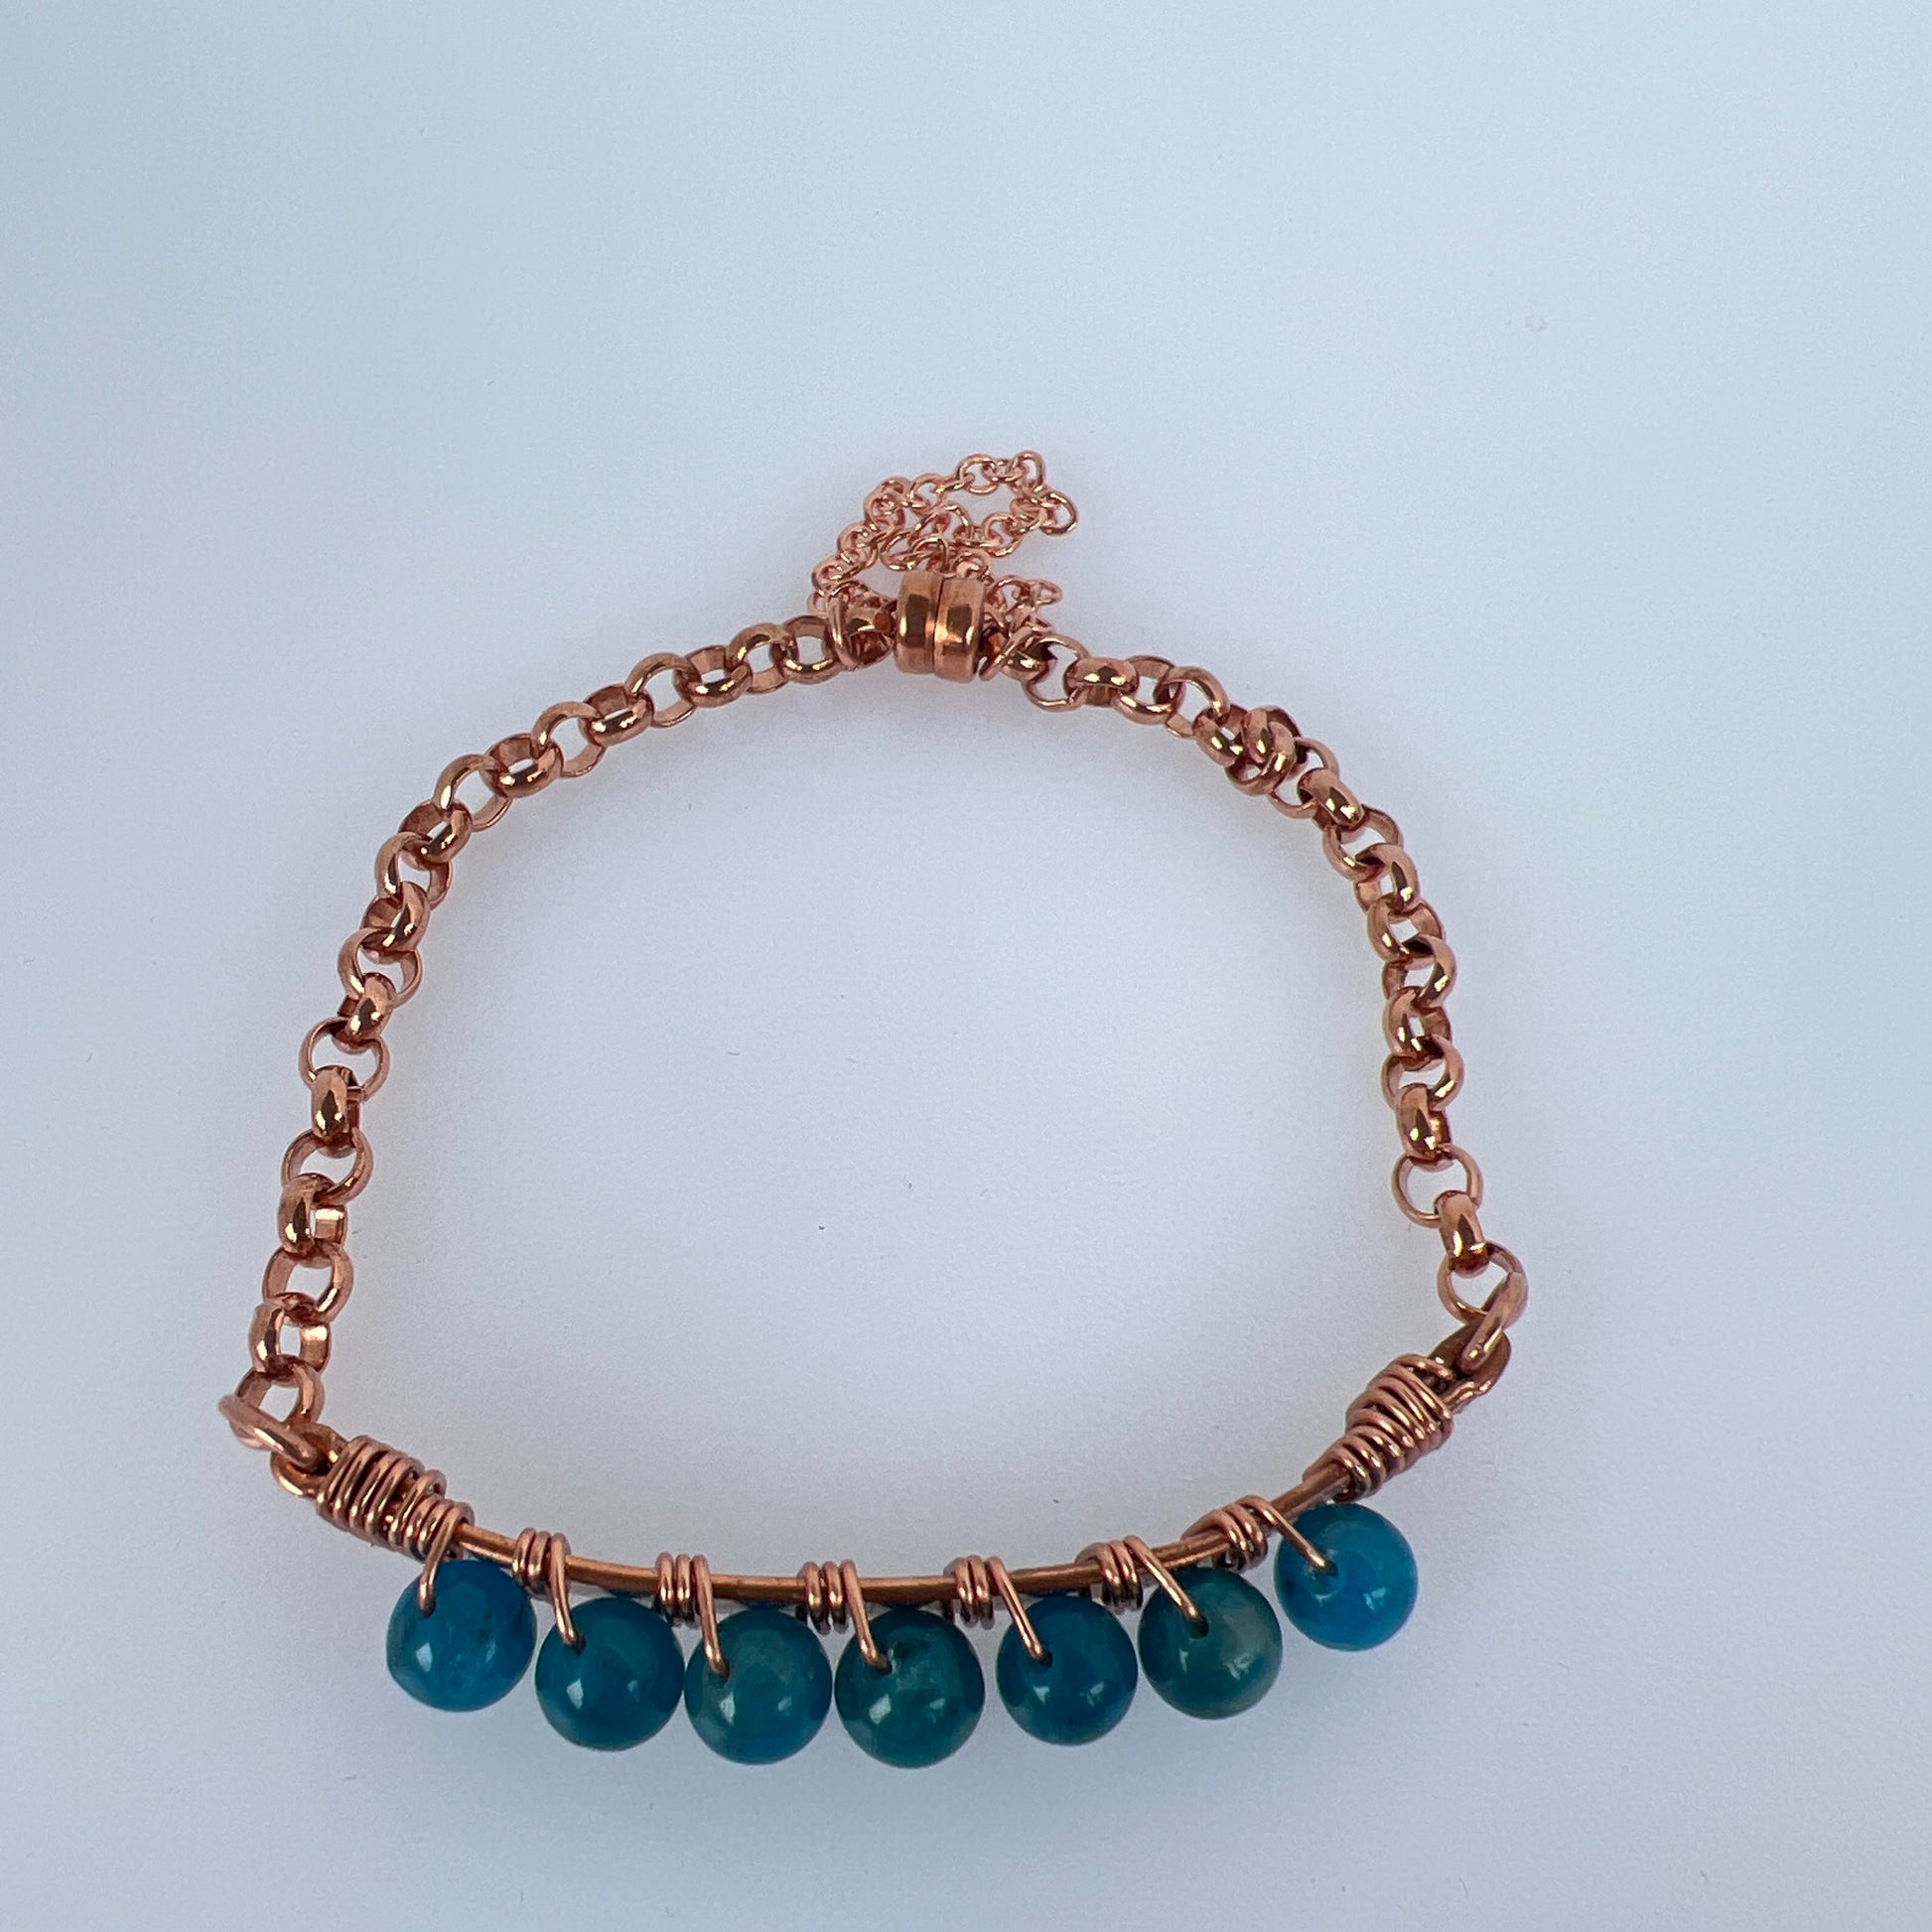 6mm apatite wire wrapped on copper plated and copper rolo chain finished up with copper magnet